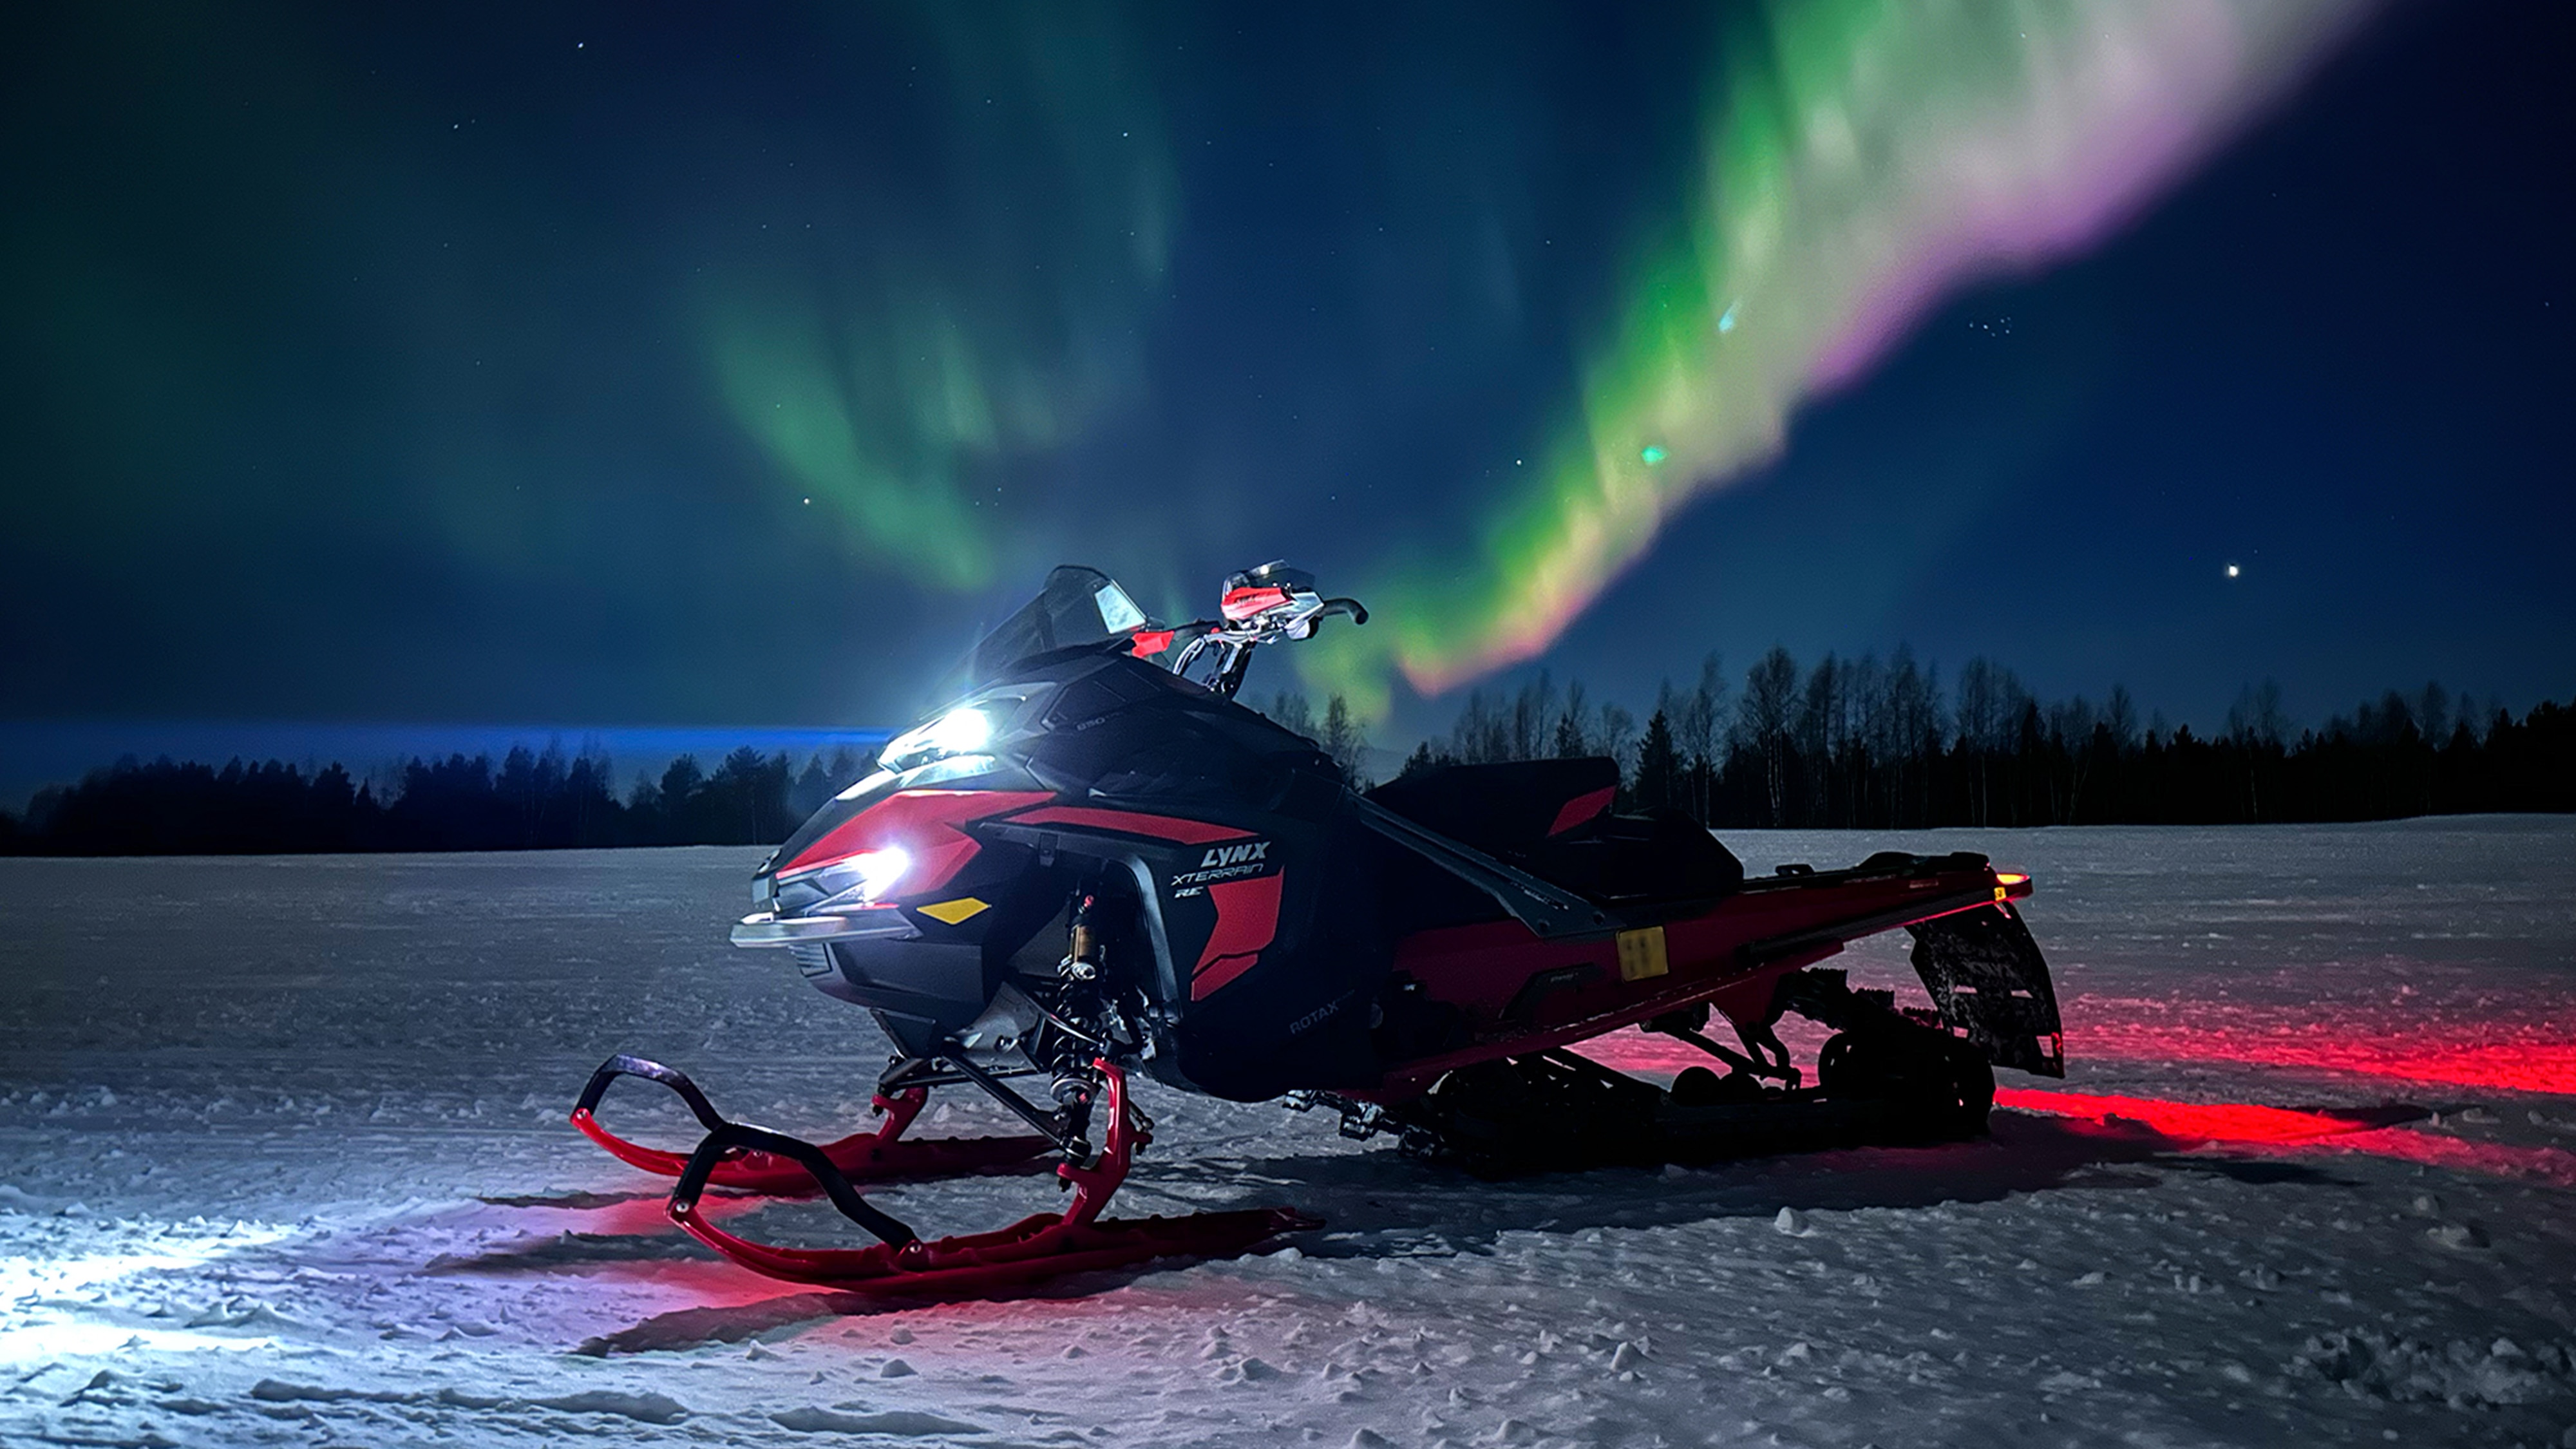 Lynx Xterrain RE 850 E-TEC crossover snowmobile parked under northern lights